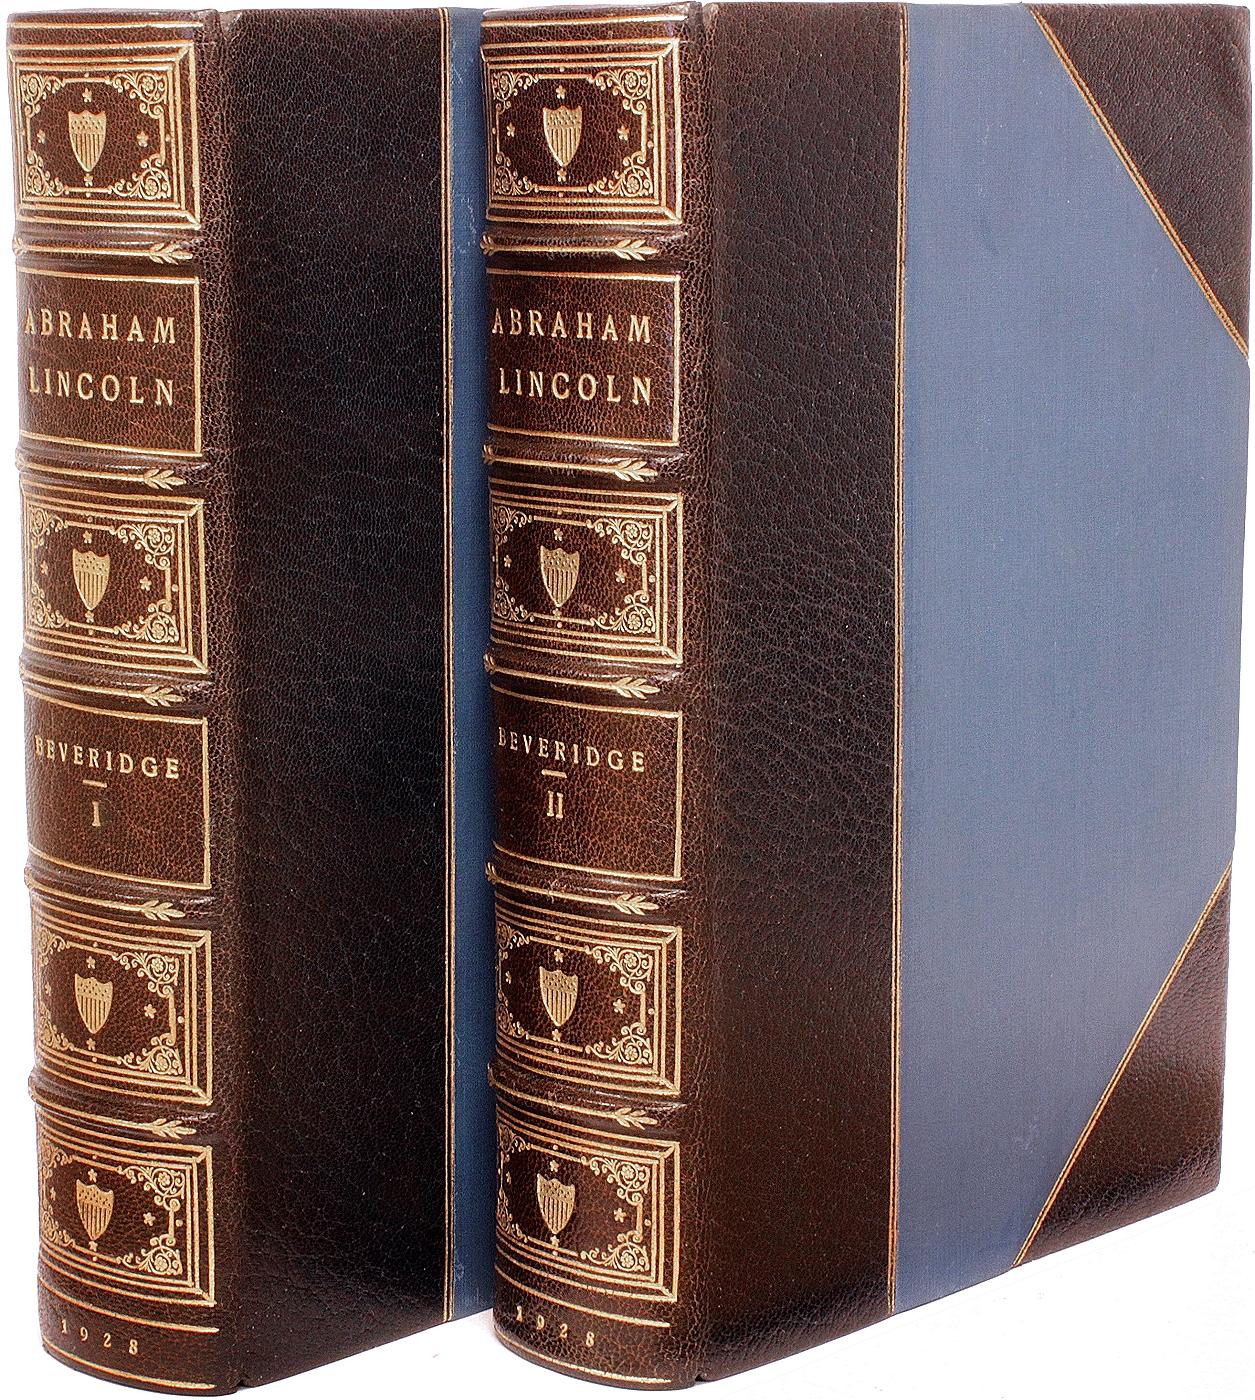 Early 20th Century BEVERIDGE, Albert J.. Abraham Lincoln 1809-1858. 2 VOLUMES - FIRST EDITION ! For Sale